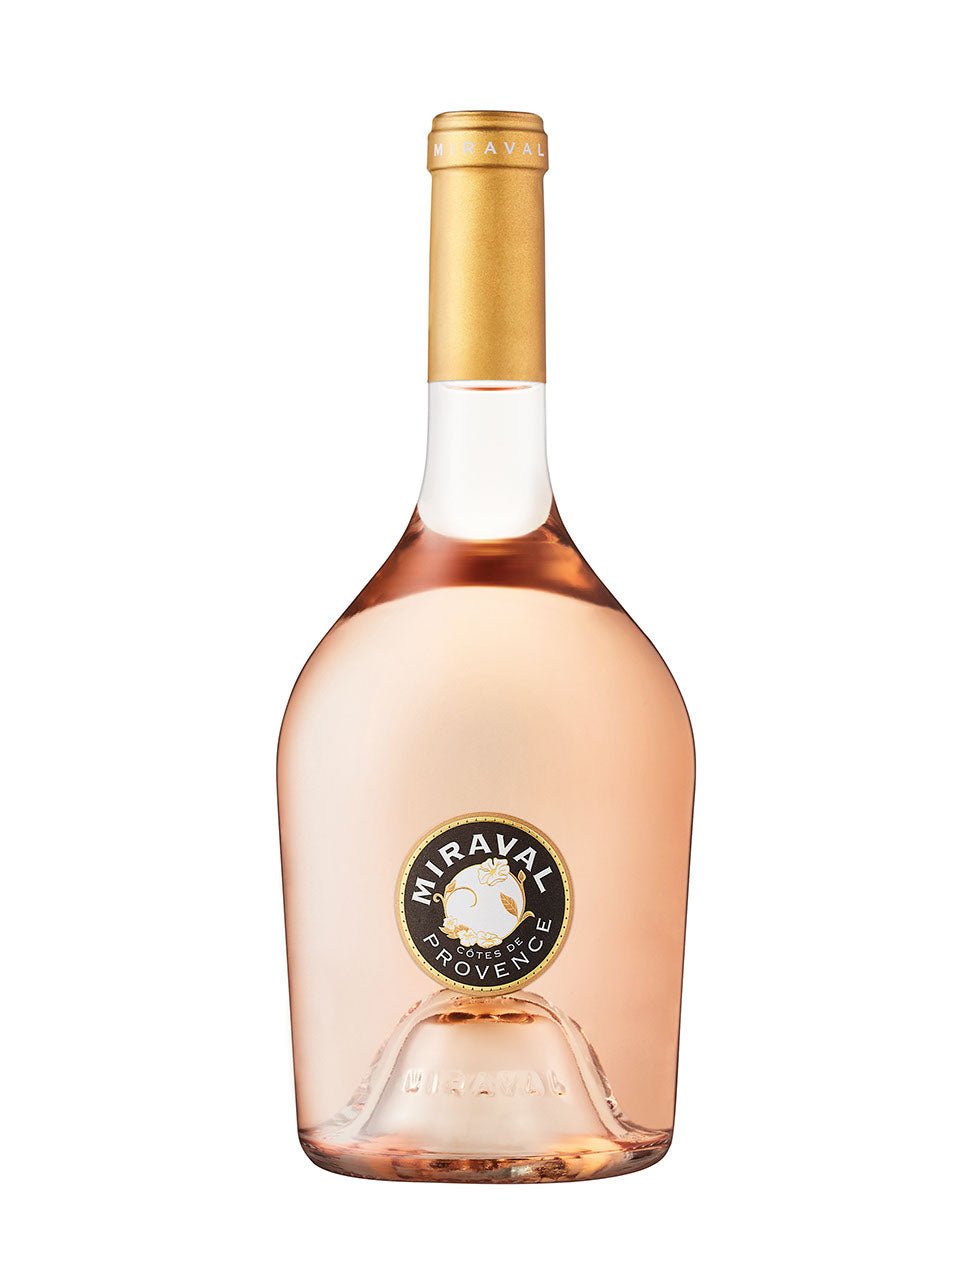 Miraval Rosé | Exquisite Wine & Alcohol Gift Delivery Toronto Canada | Vyno